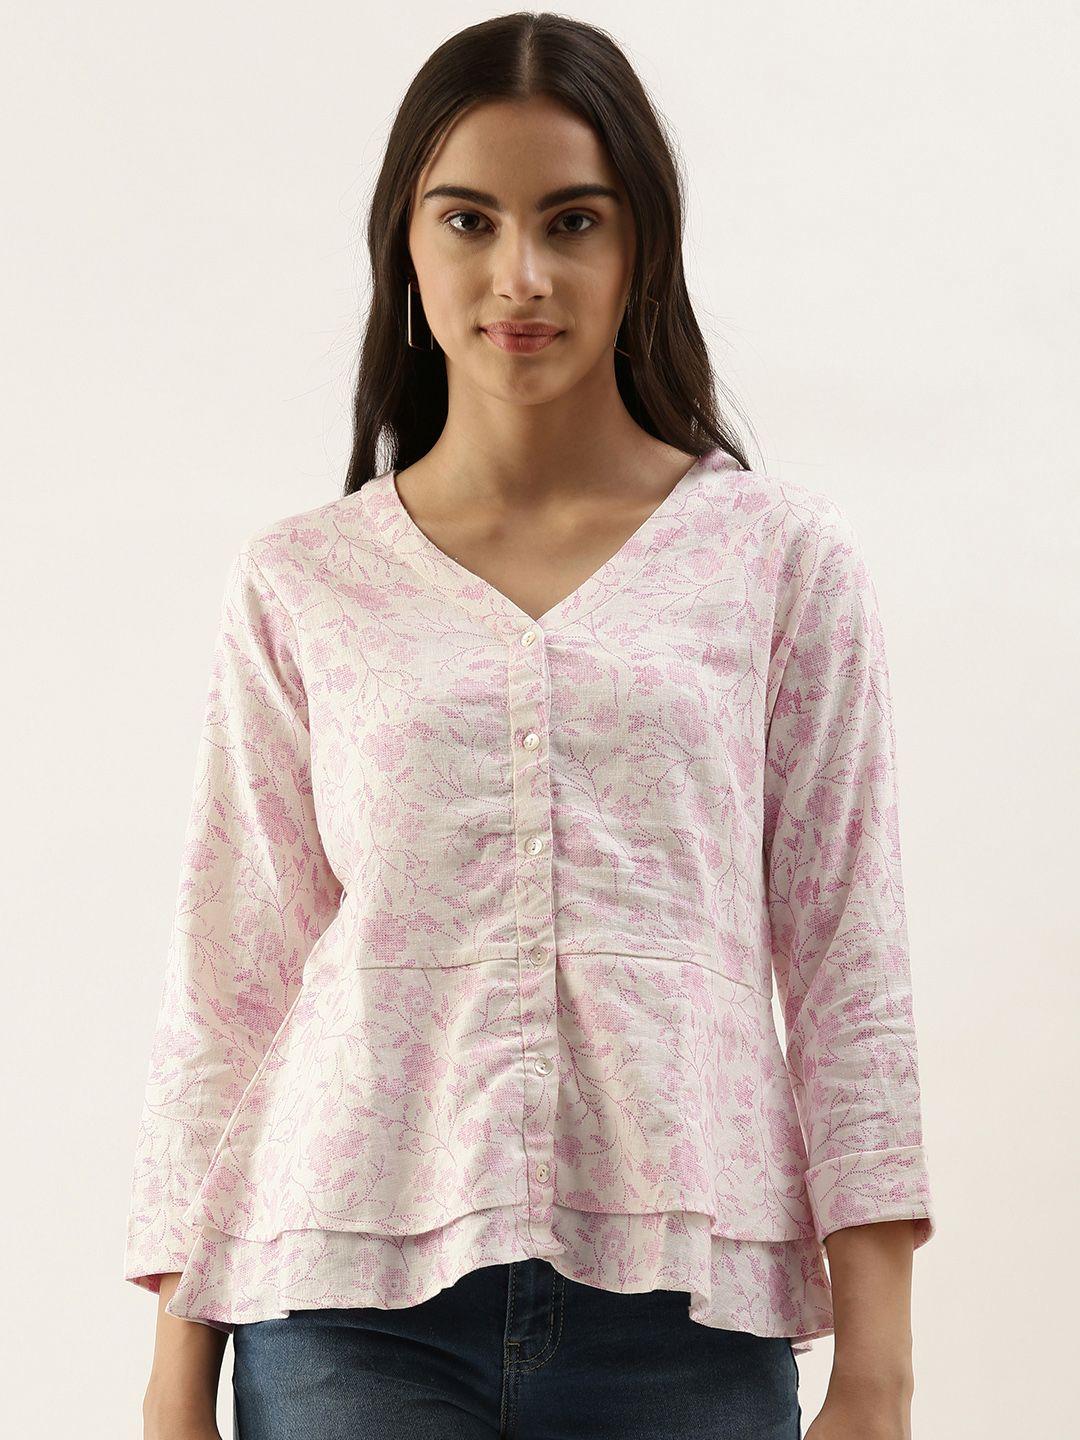 and white & pink floral print layered linen blend shirt style top